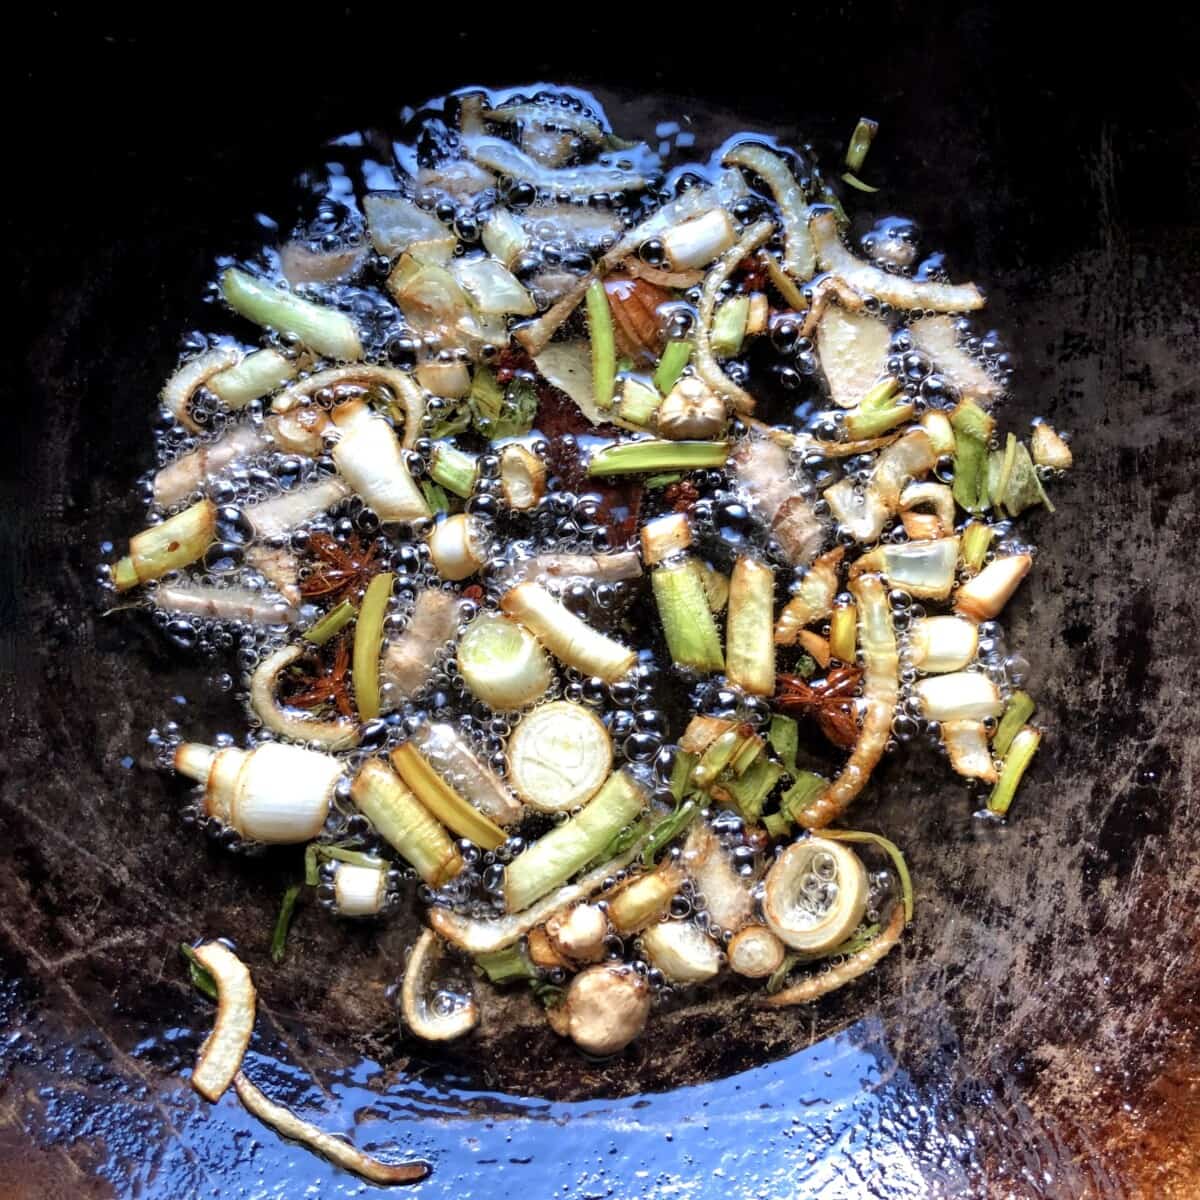 golden brown aromatics swimming and sizzling in oil in a wok